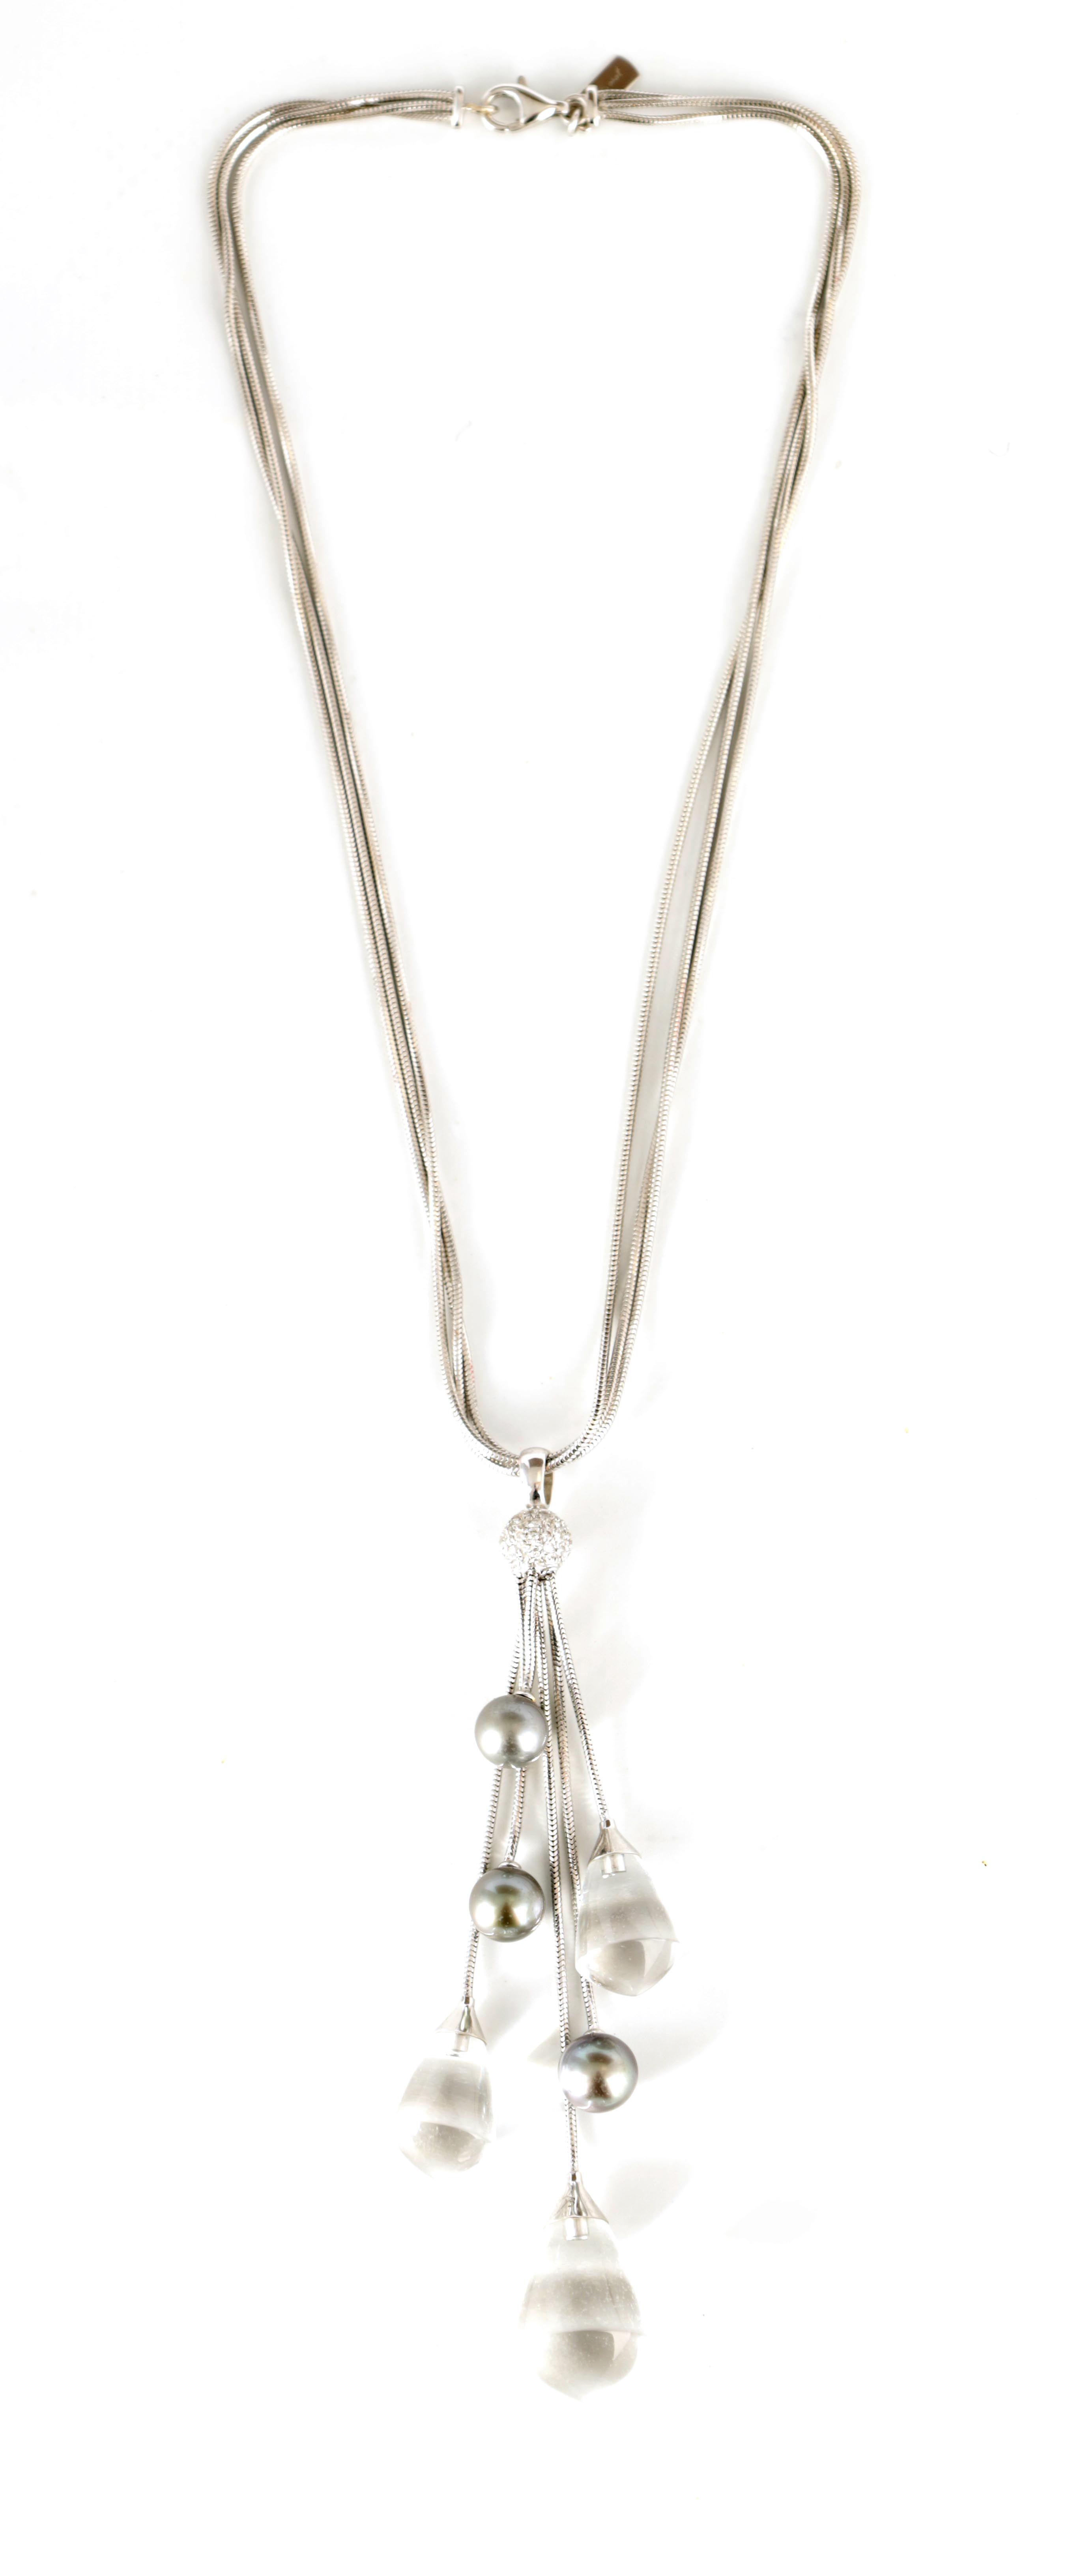 A LADIES 18CT WHITE GOLD BACCARAT DIAMOND, PEARL AND CRYSTAL NECKLACE formed as a triple chain